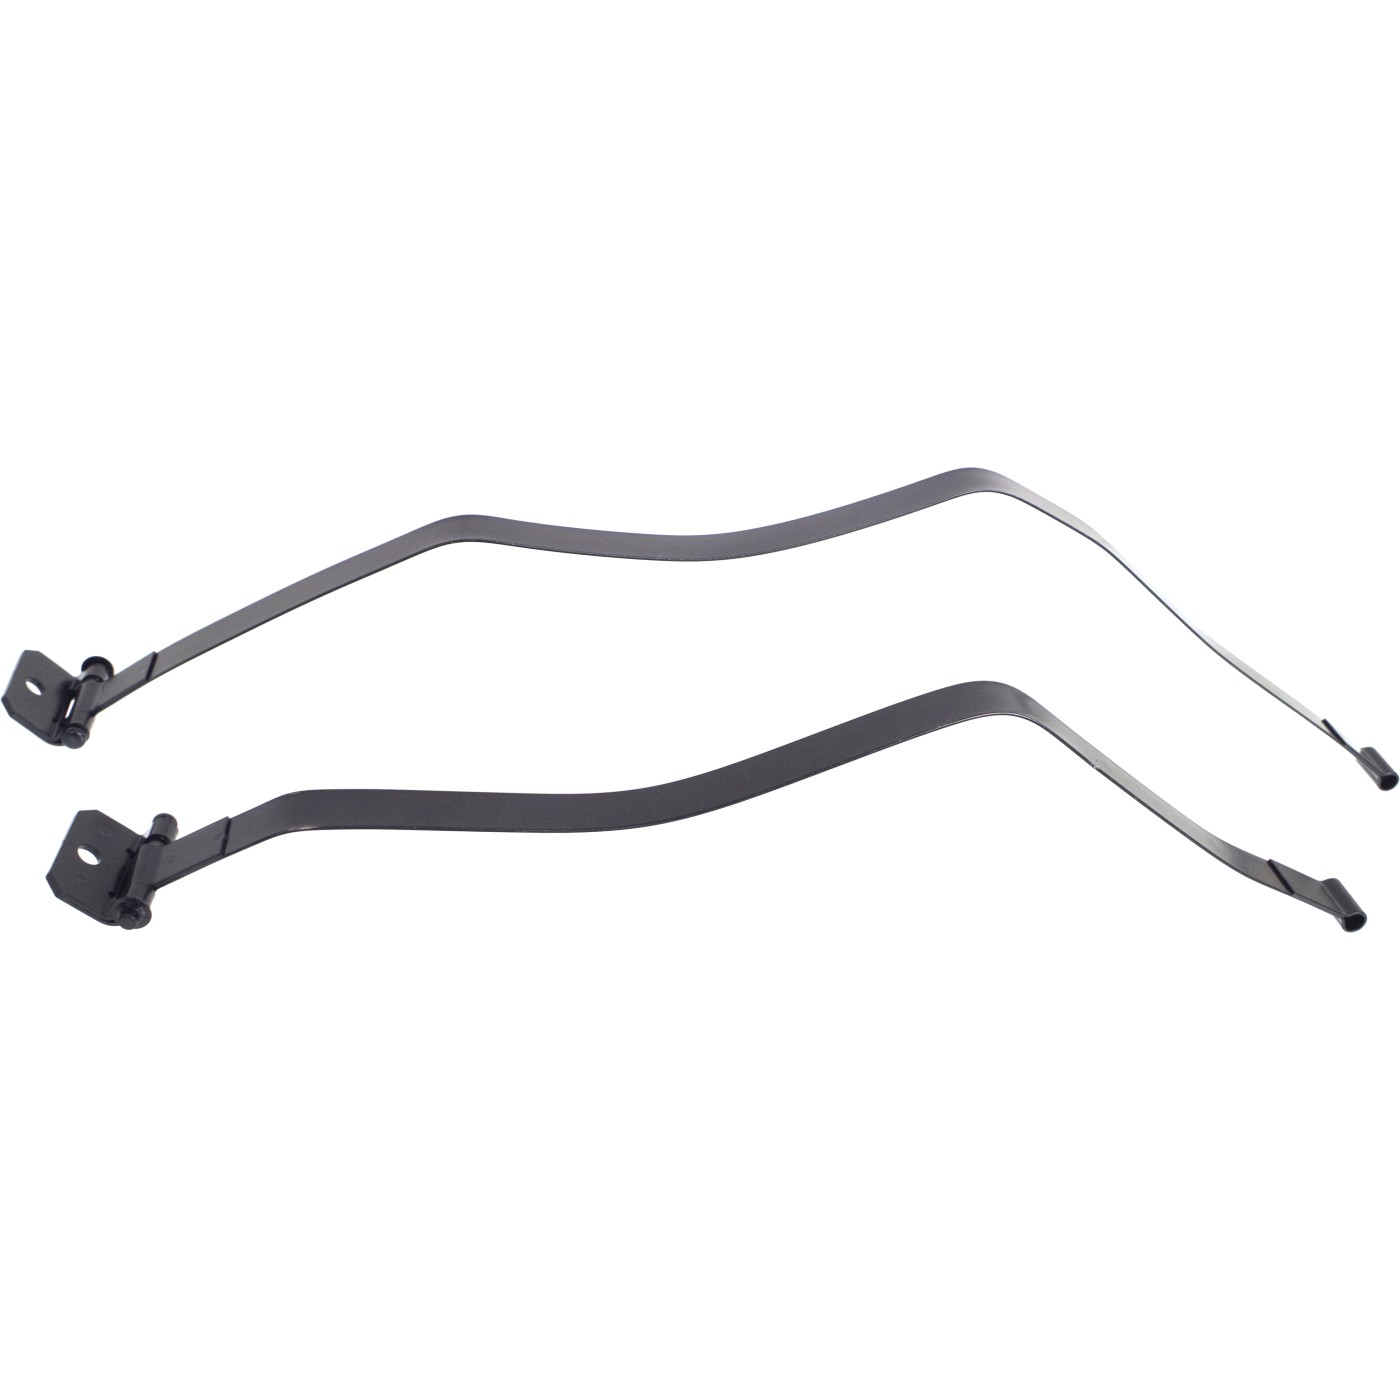 New Fuel Tank Straps Gas Set of 2 for Toyota Tundra 2000-2004